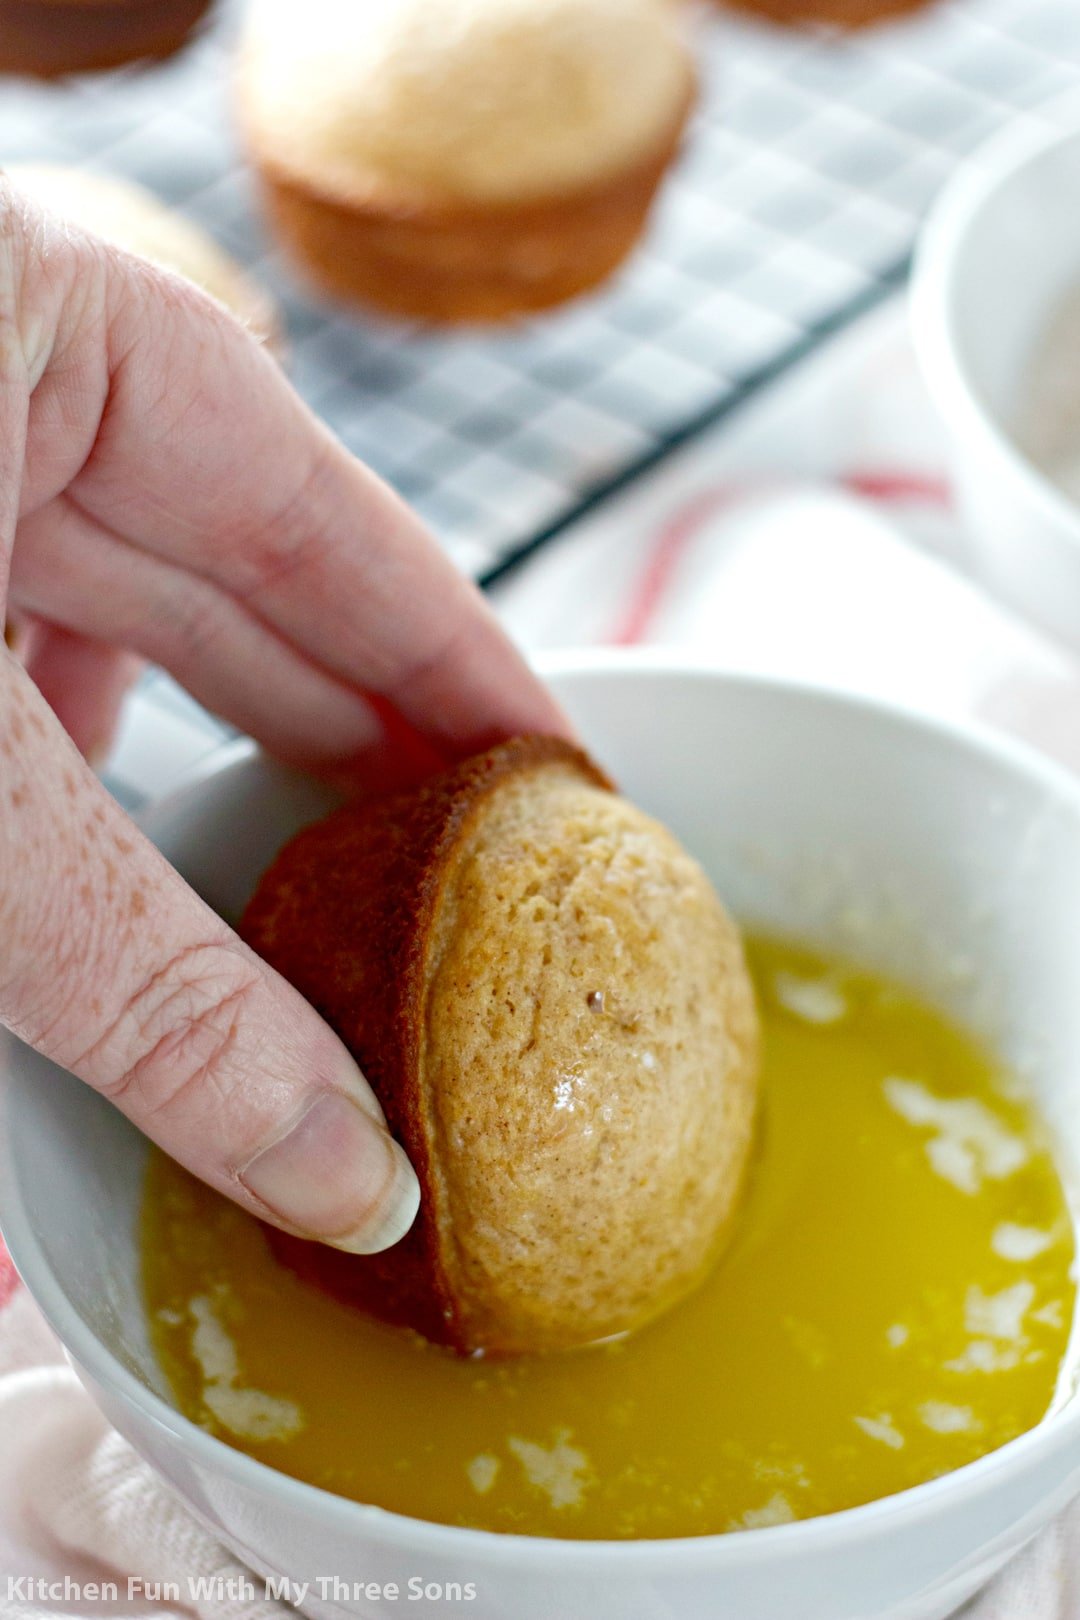 A cooled muffin being dipped into a bowl of melted butter